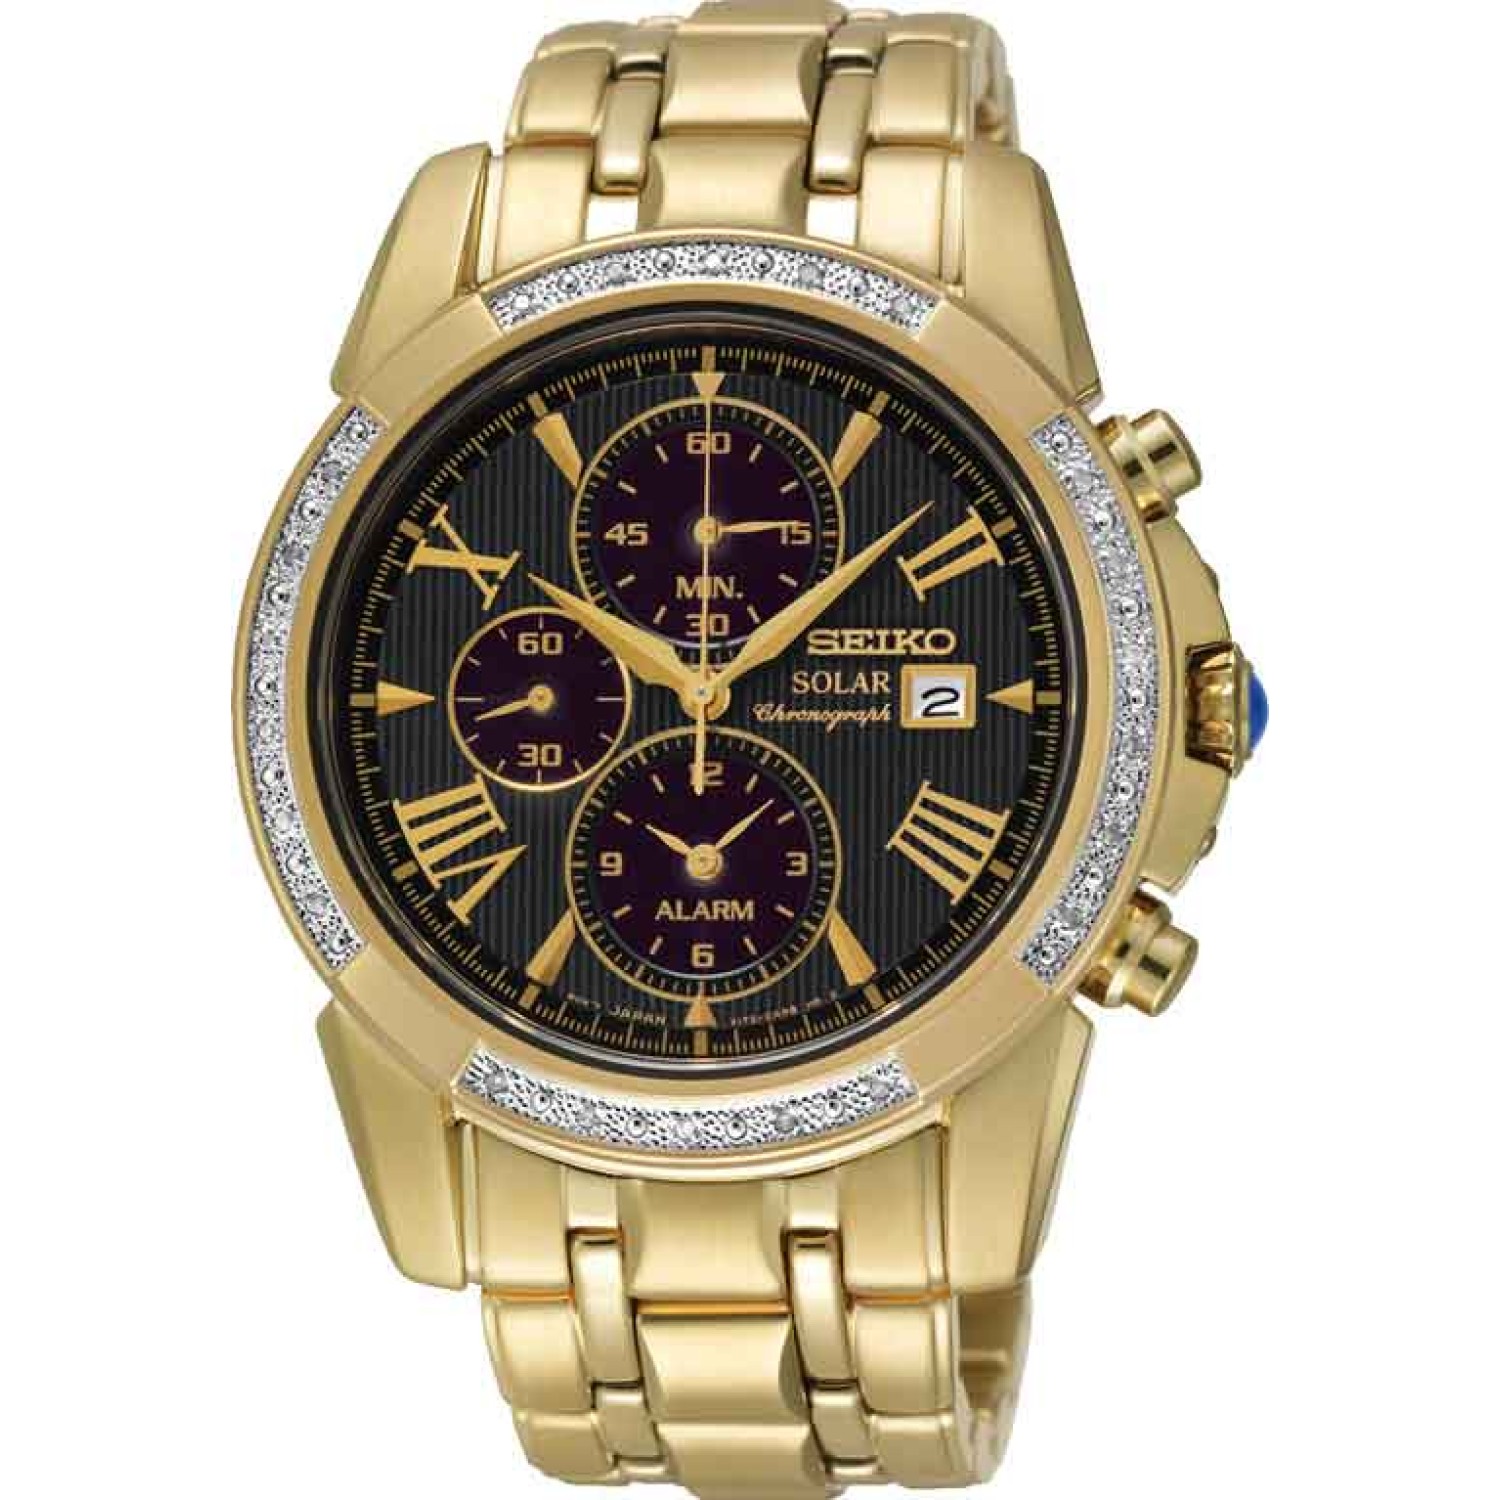 SSC314P-9 Seiko Le Grand Solar Chronograph Alarm Watch. SSC218P Seiko Le Grand Solar Chronograph Alarm Watch now available at Christies Papatoetoe or onlineOxipay is simply the easier way to pay - use Oxipay and well spread your payment up to a maximum of